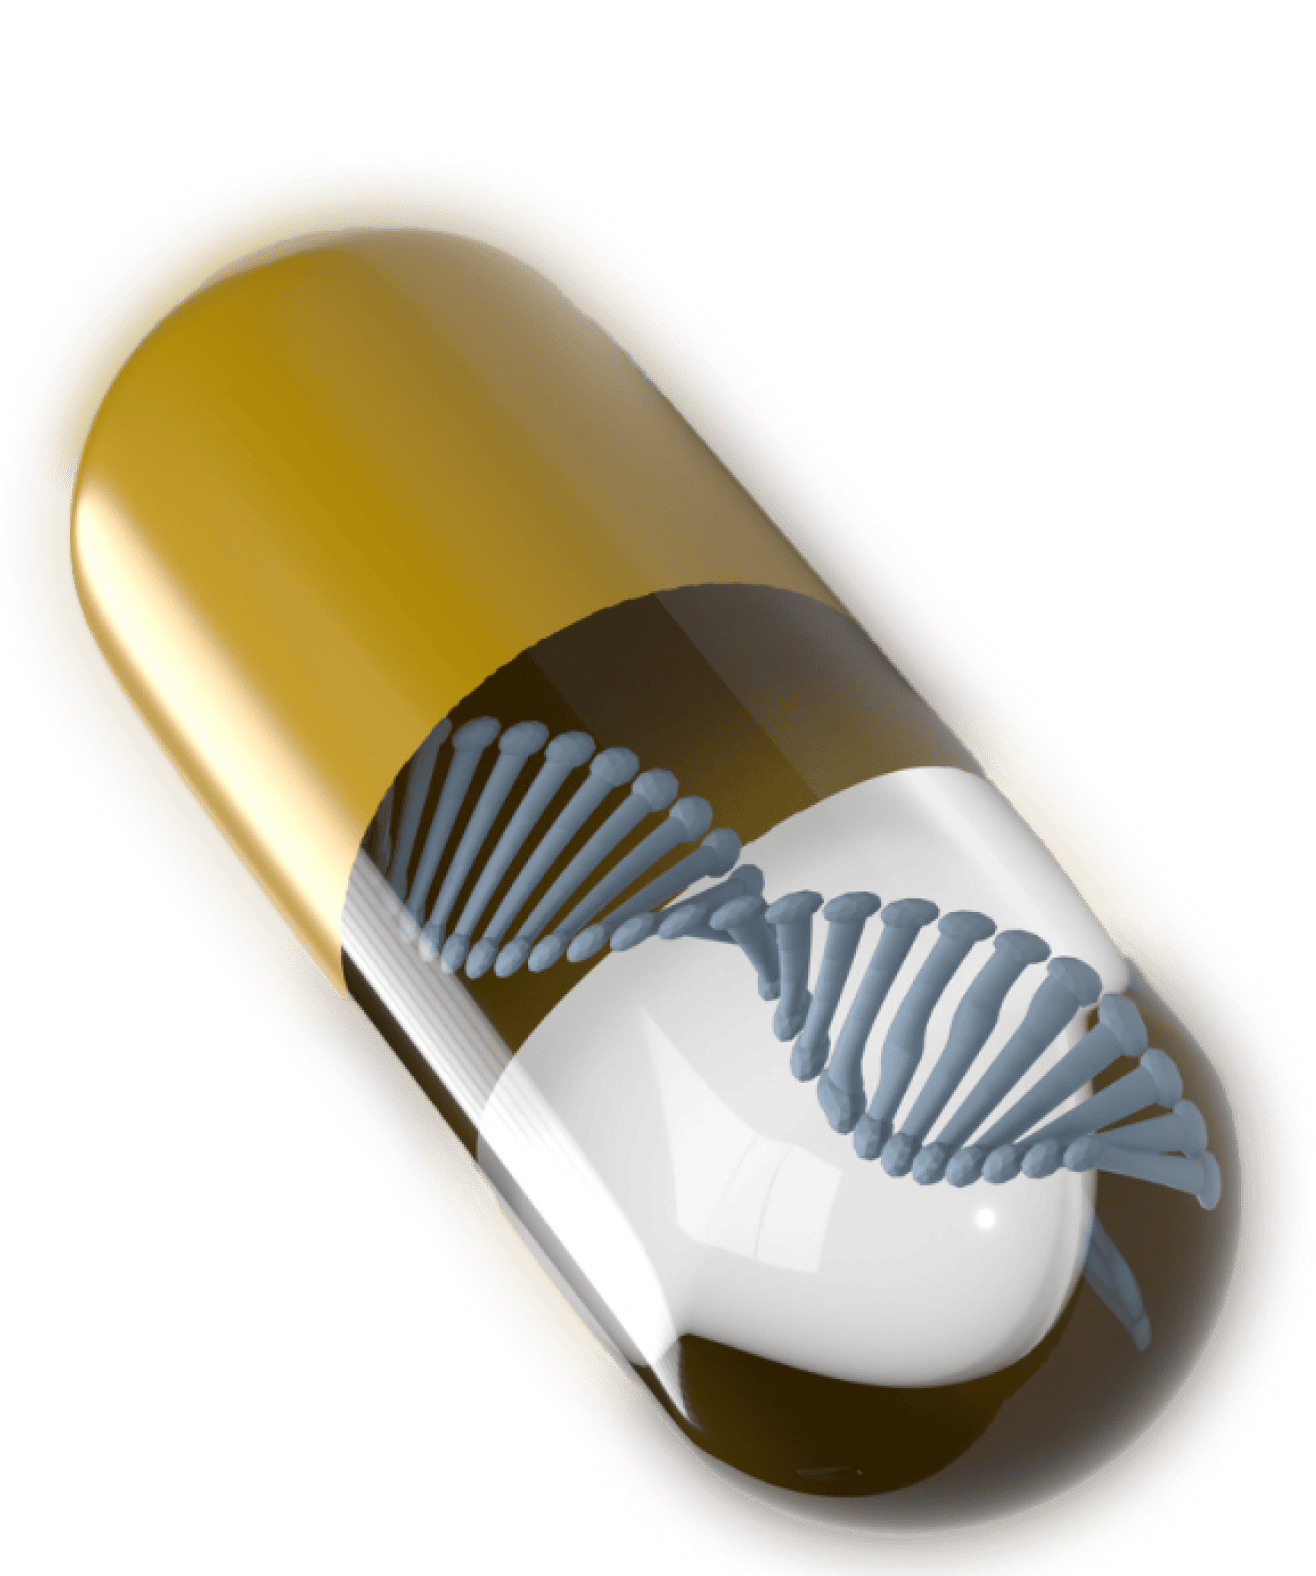 A capsule pill with a golden top and white bottom, featuring a 3D representation of a DNA strand inside.